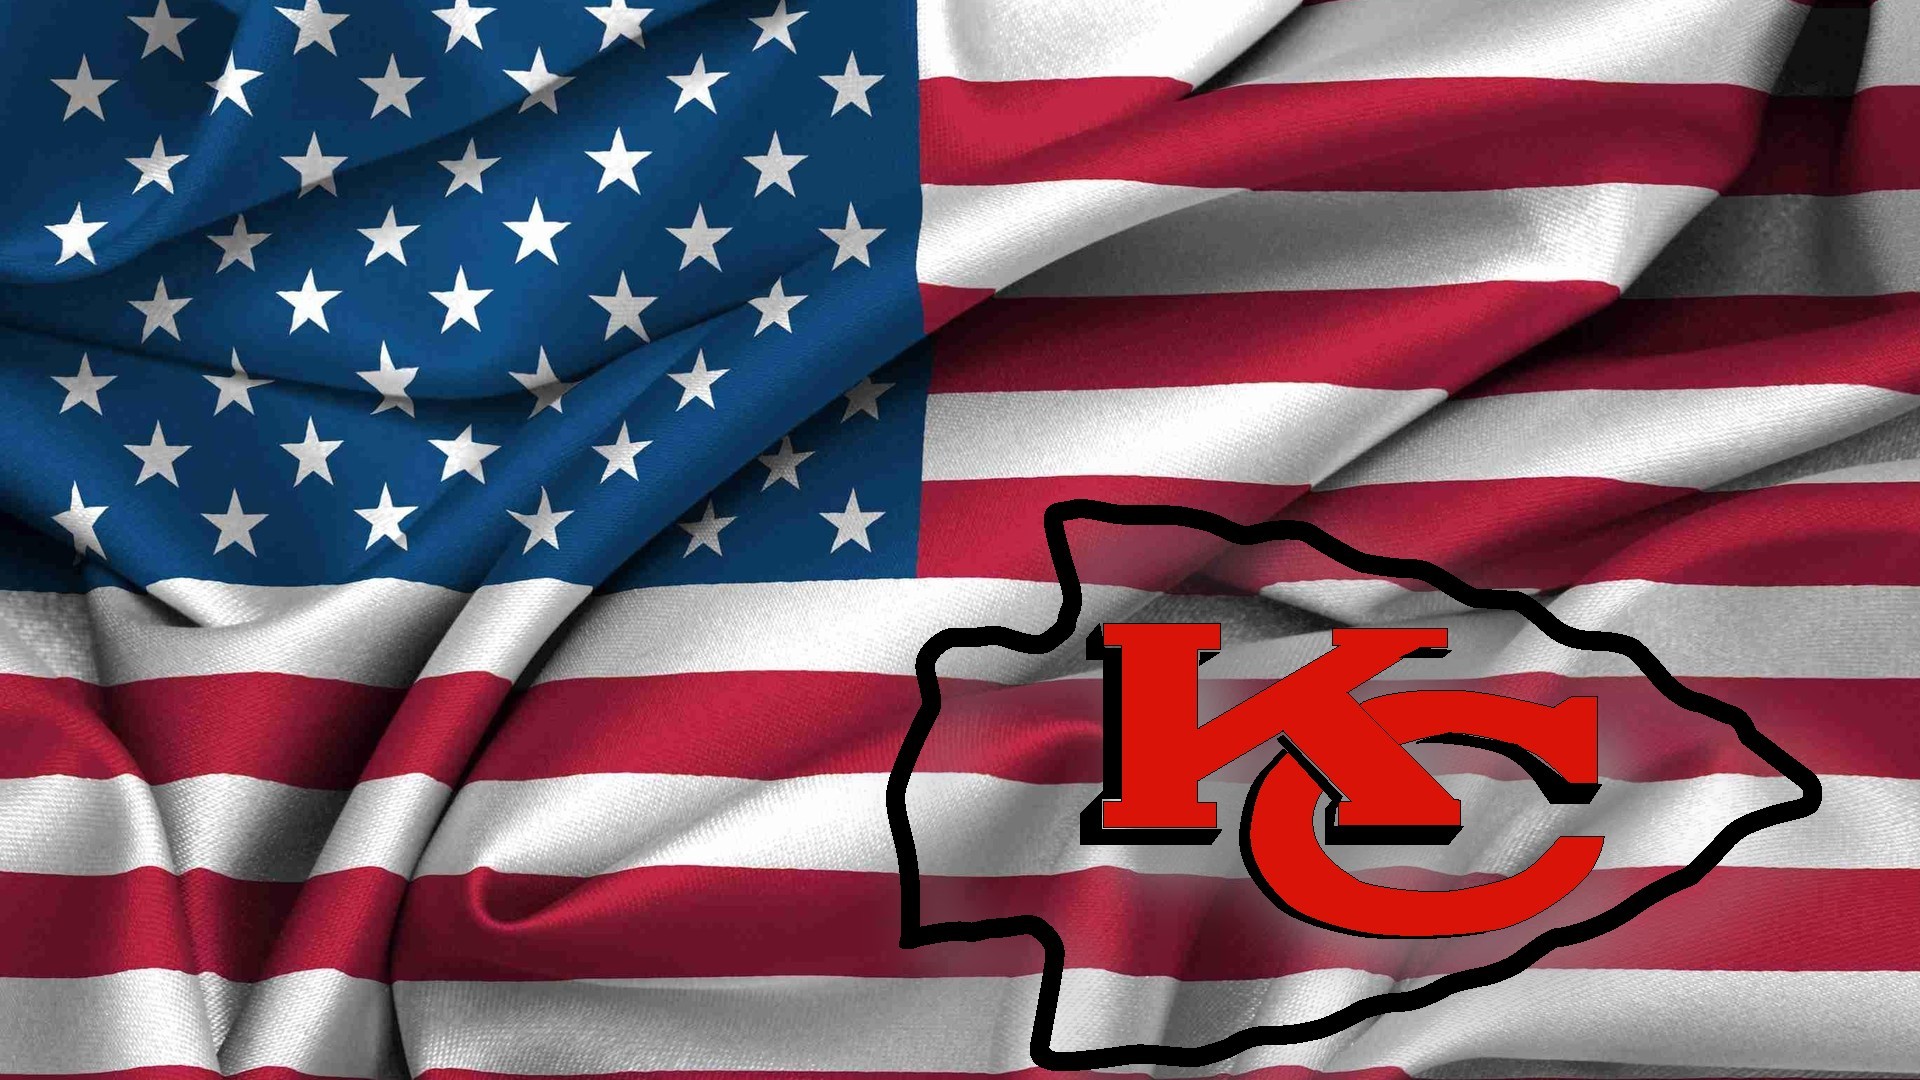 Kc Chiefs Wallpaper and Screensavers (64+ images)